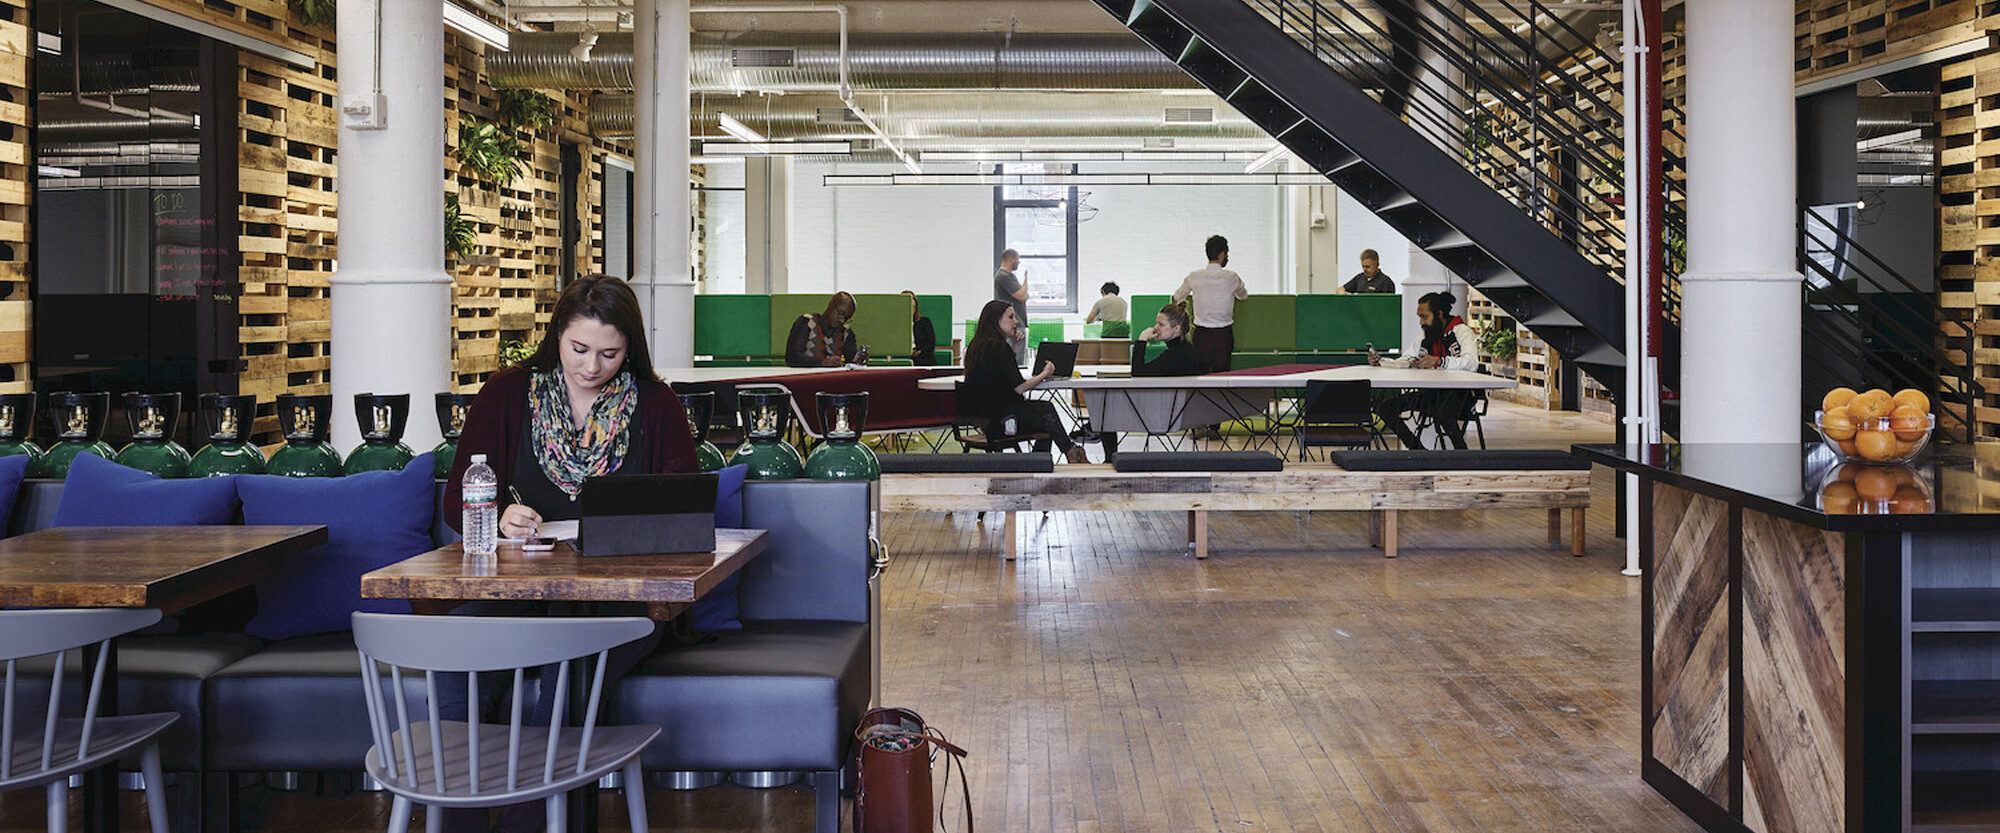 Open-concept office space featuring an eclectic mix of industrial and biophilic design elements, with exposed ceiling pipes, lush greenery partitioning work areas, and hardwood floors complementing contemporary furniture.